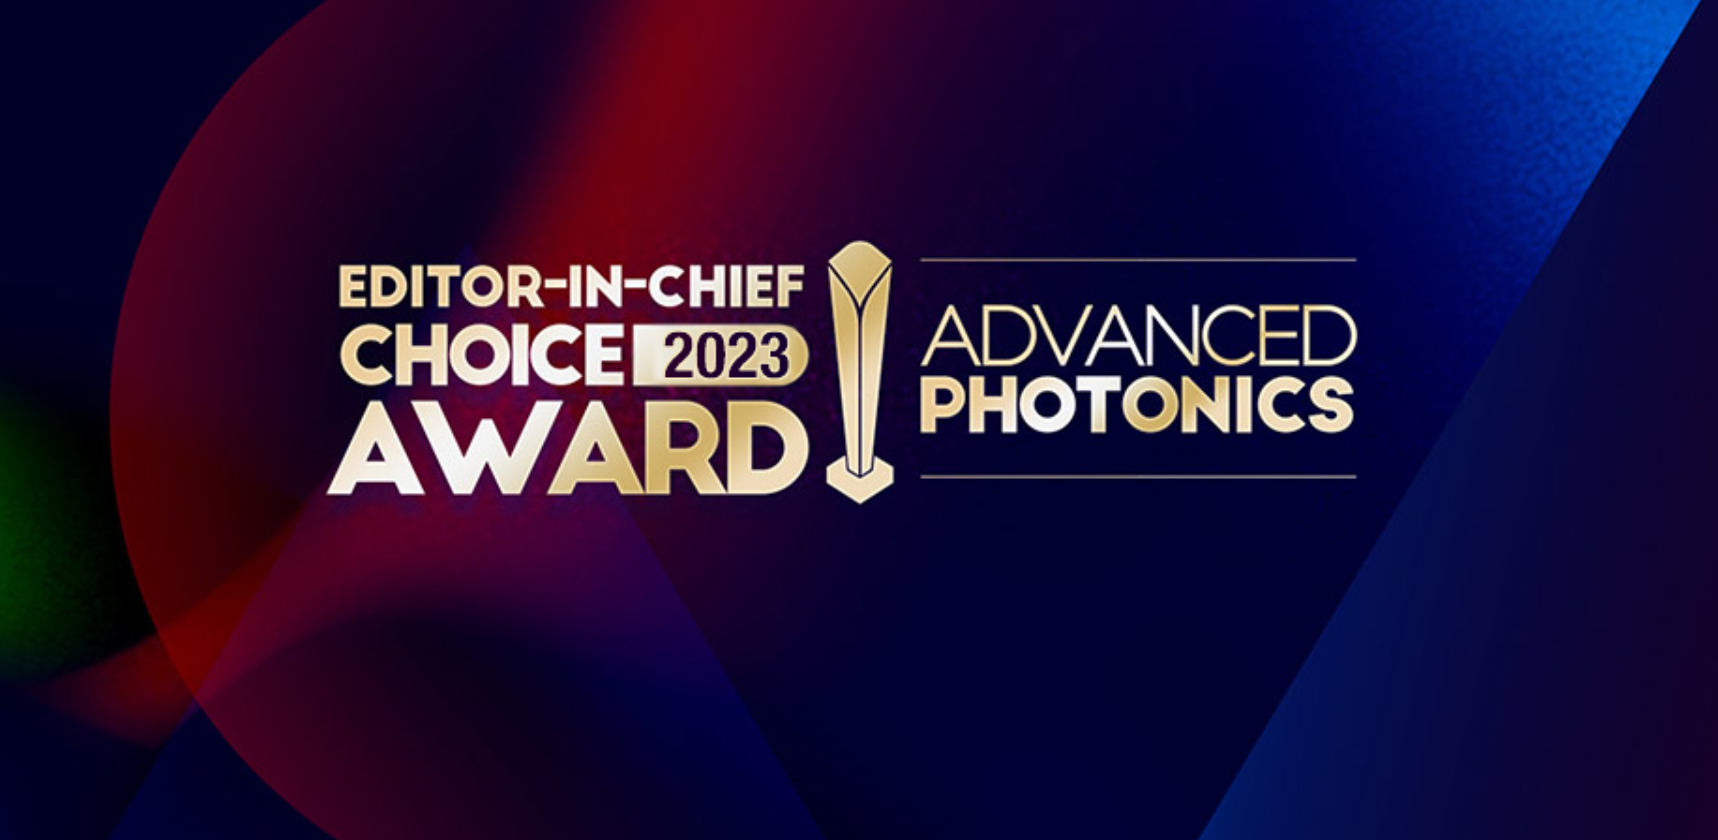 Advanced Photonics Editors-in-Chief select the best papers from 2023